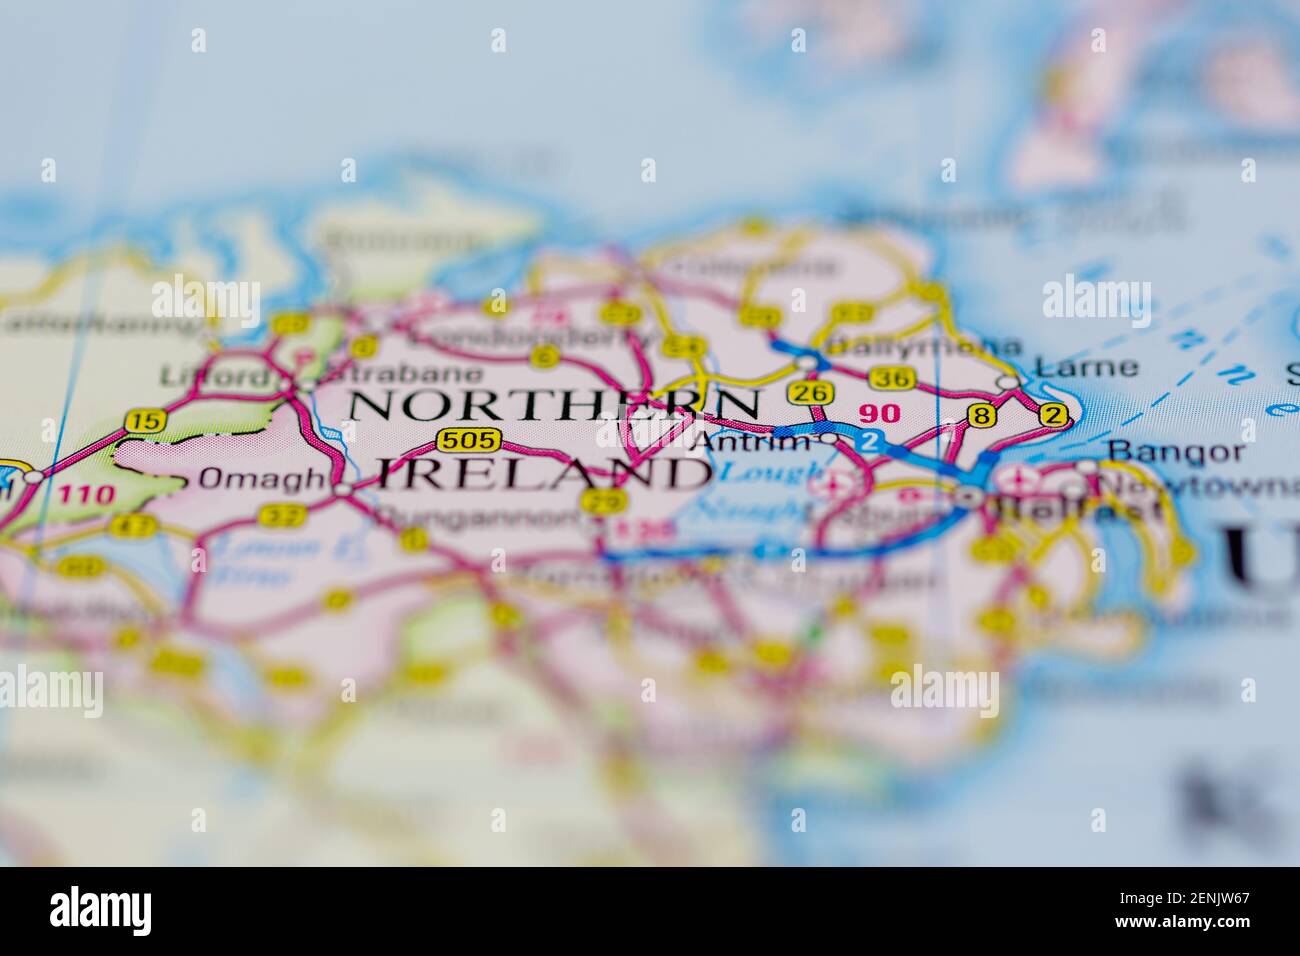 Northern Ireland shown on a Road map or a geography map Stock Photo